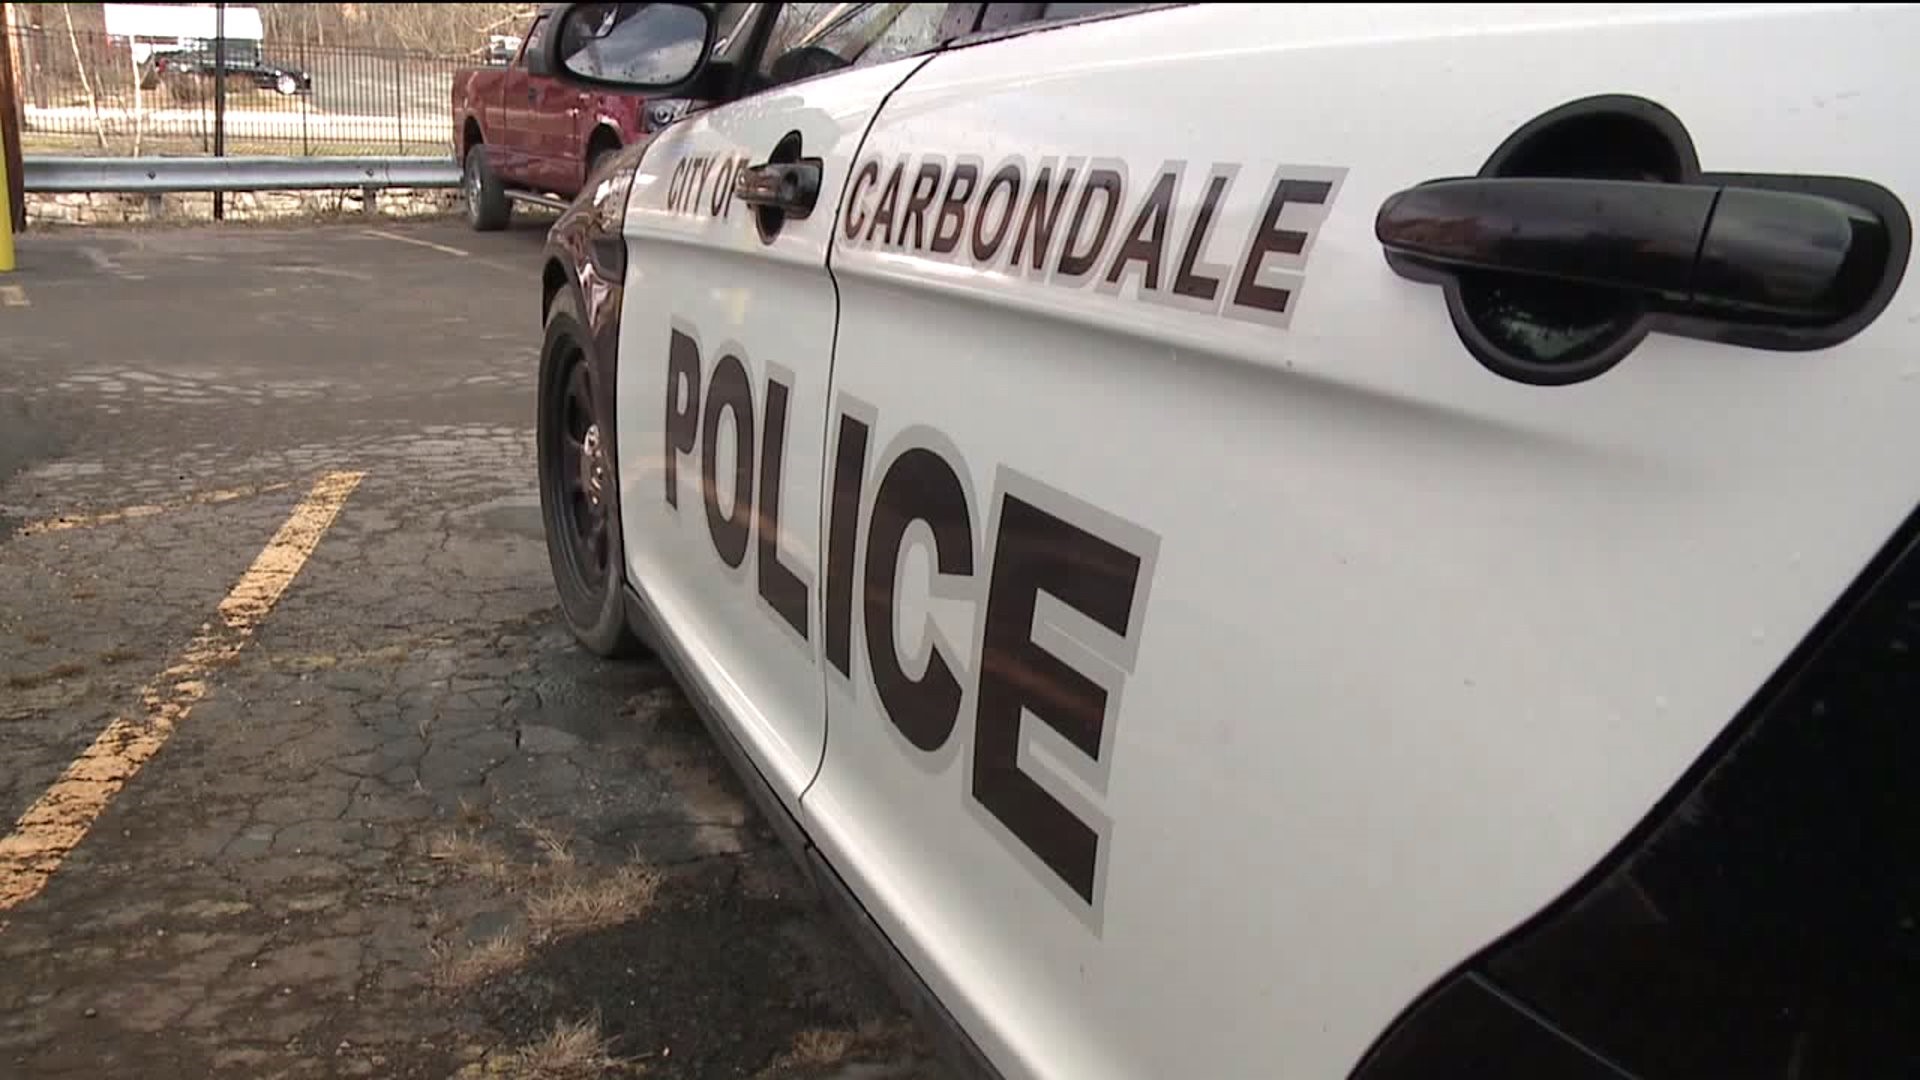 Dog Shot After Attacking Group of Kids, Police in Carbondale